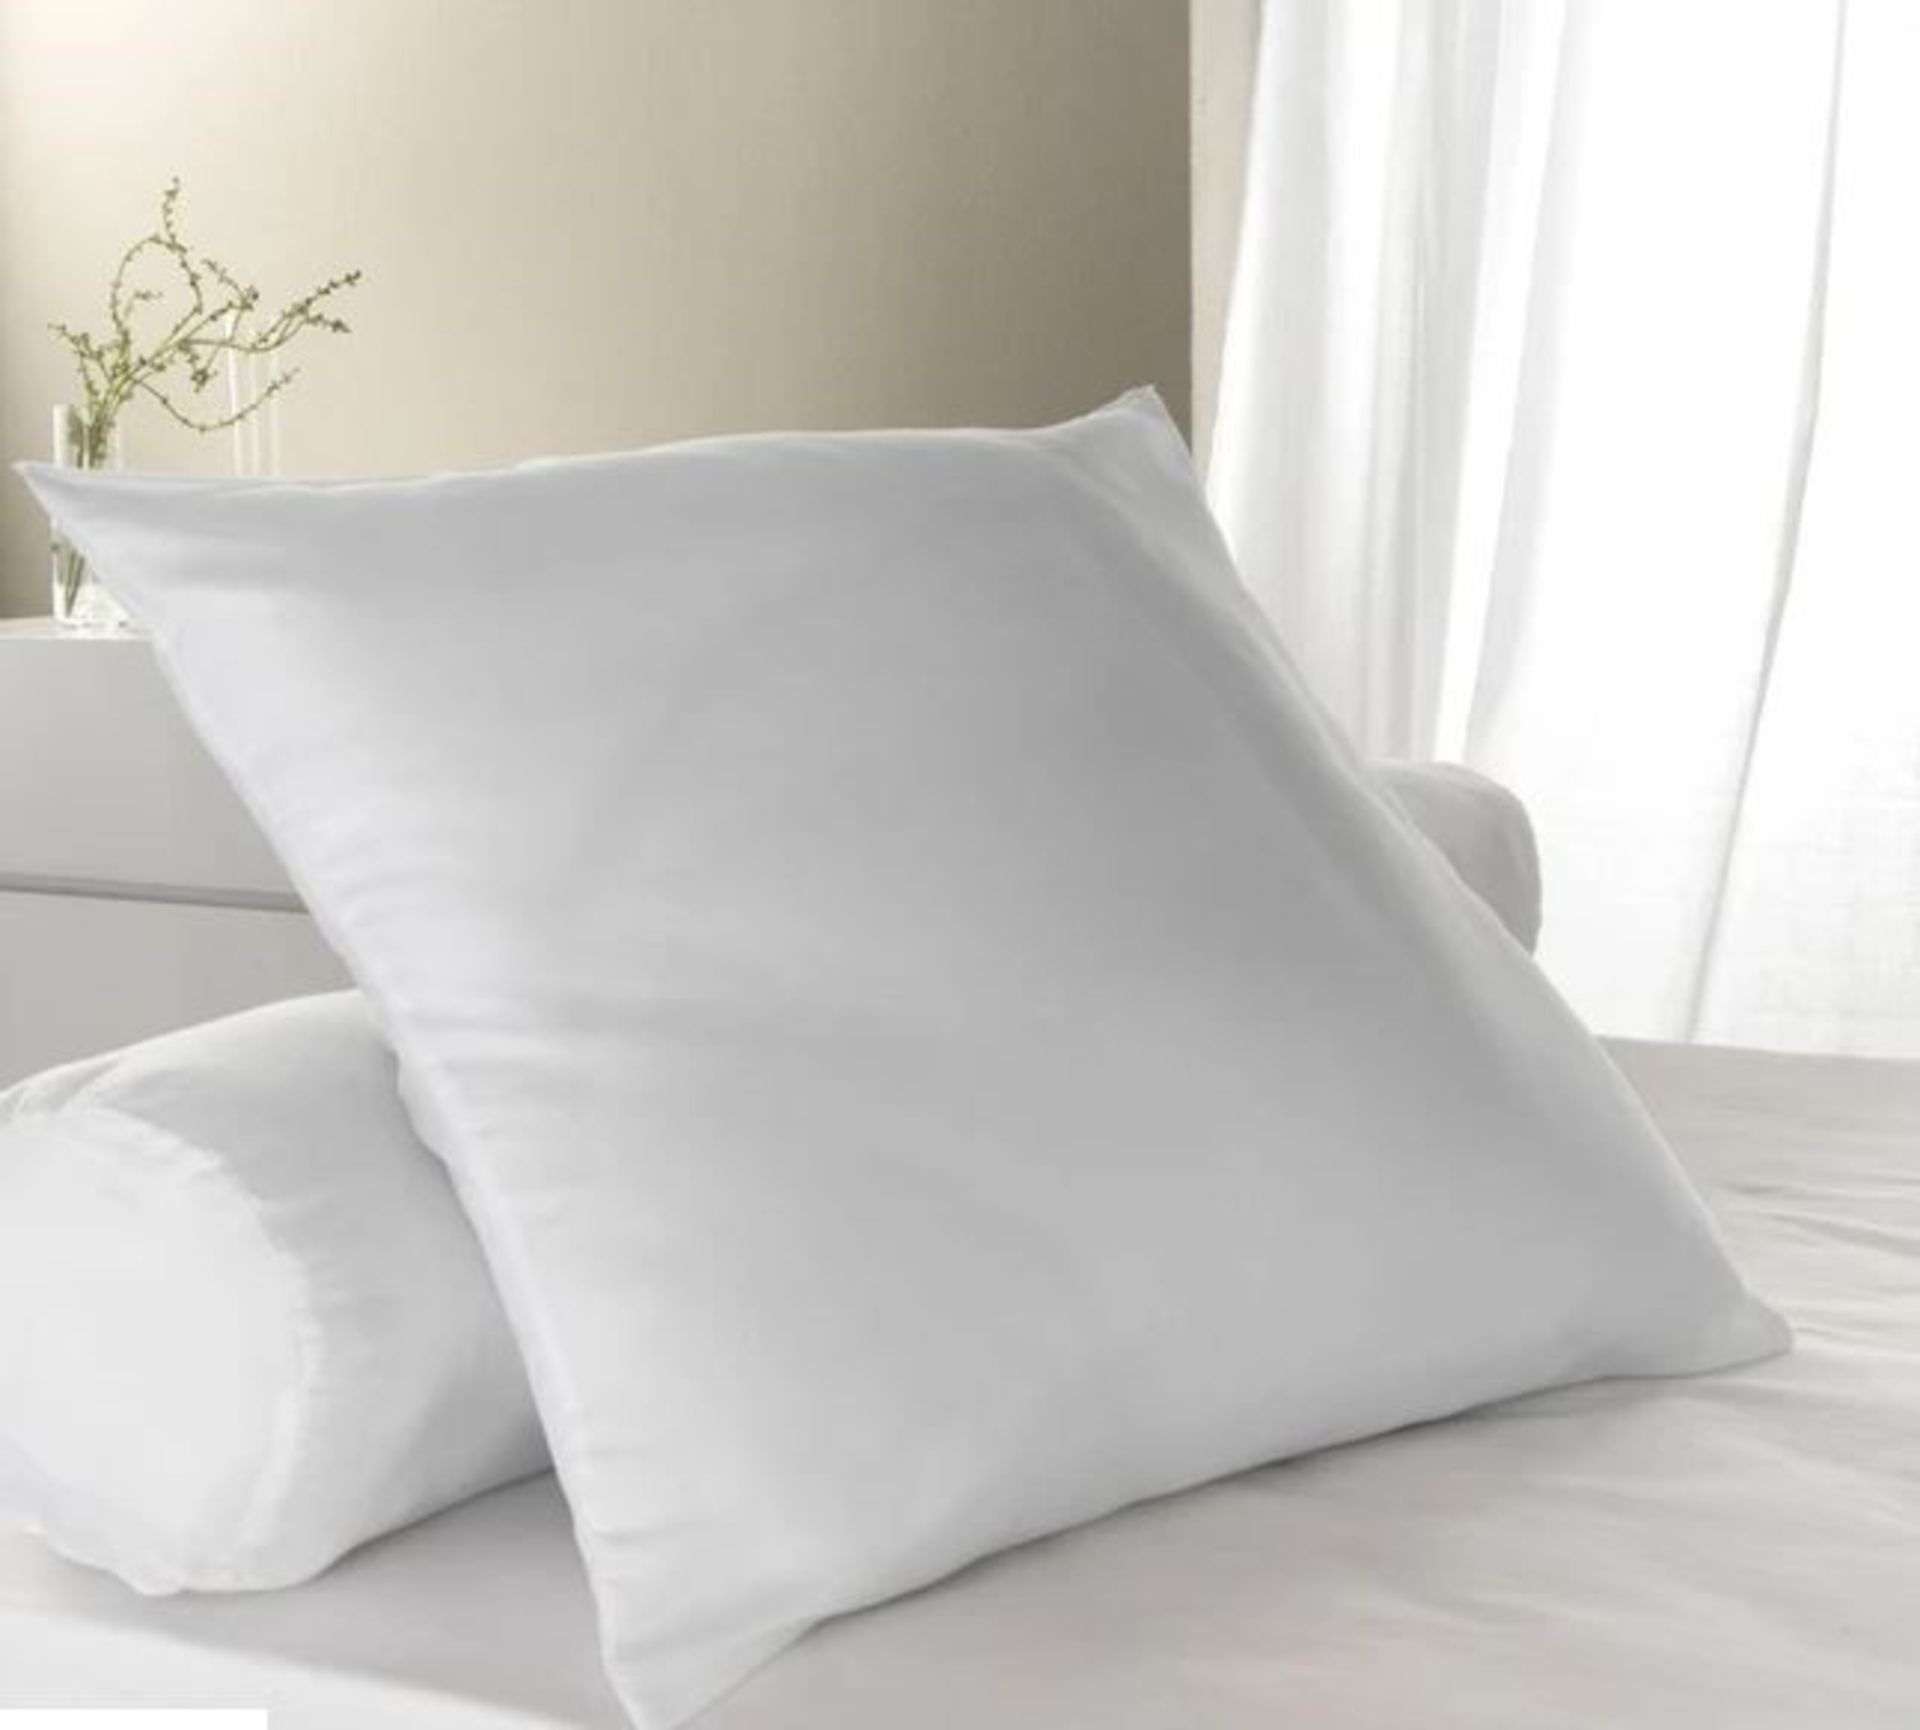 1 BAGGED GRADE A, DESIGNER SYNTHETIC PILLOW IN WHITE (PUBLIC VIEWING AVAILABLE)